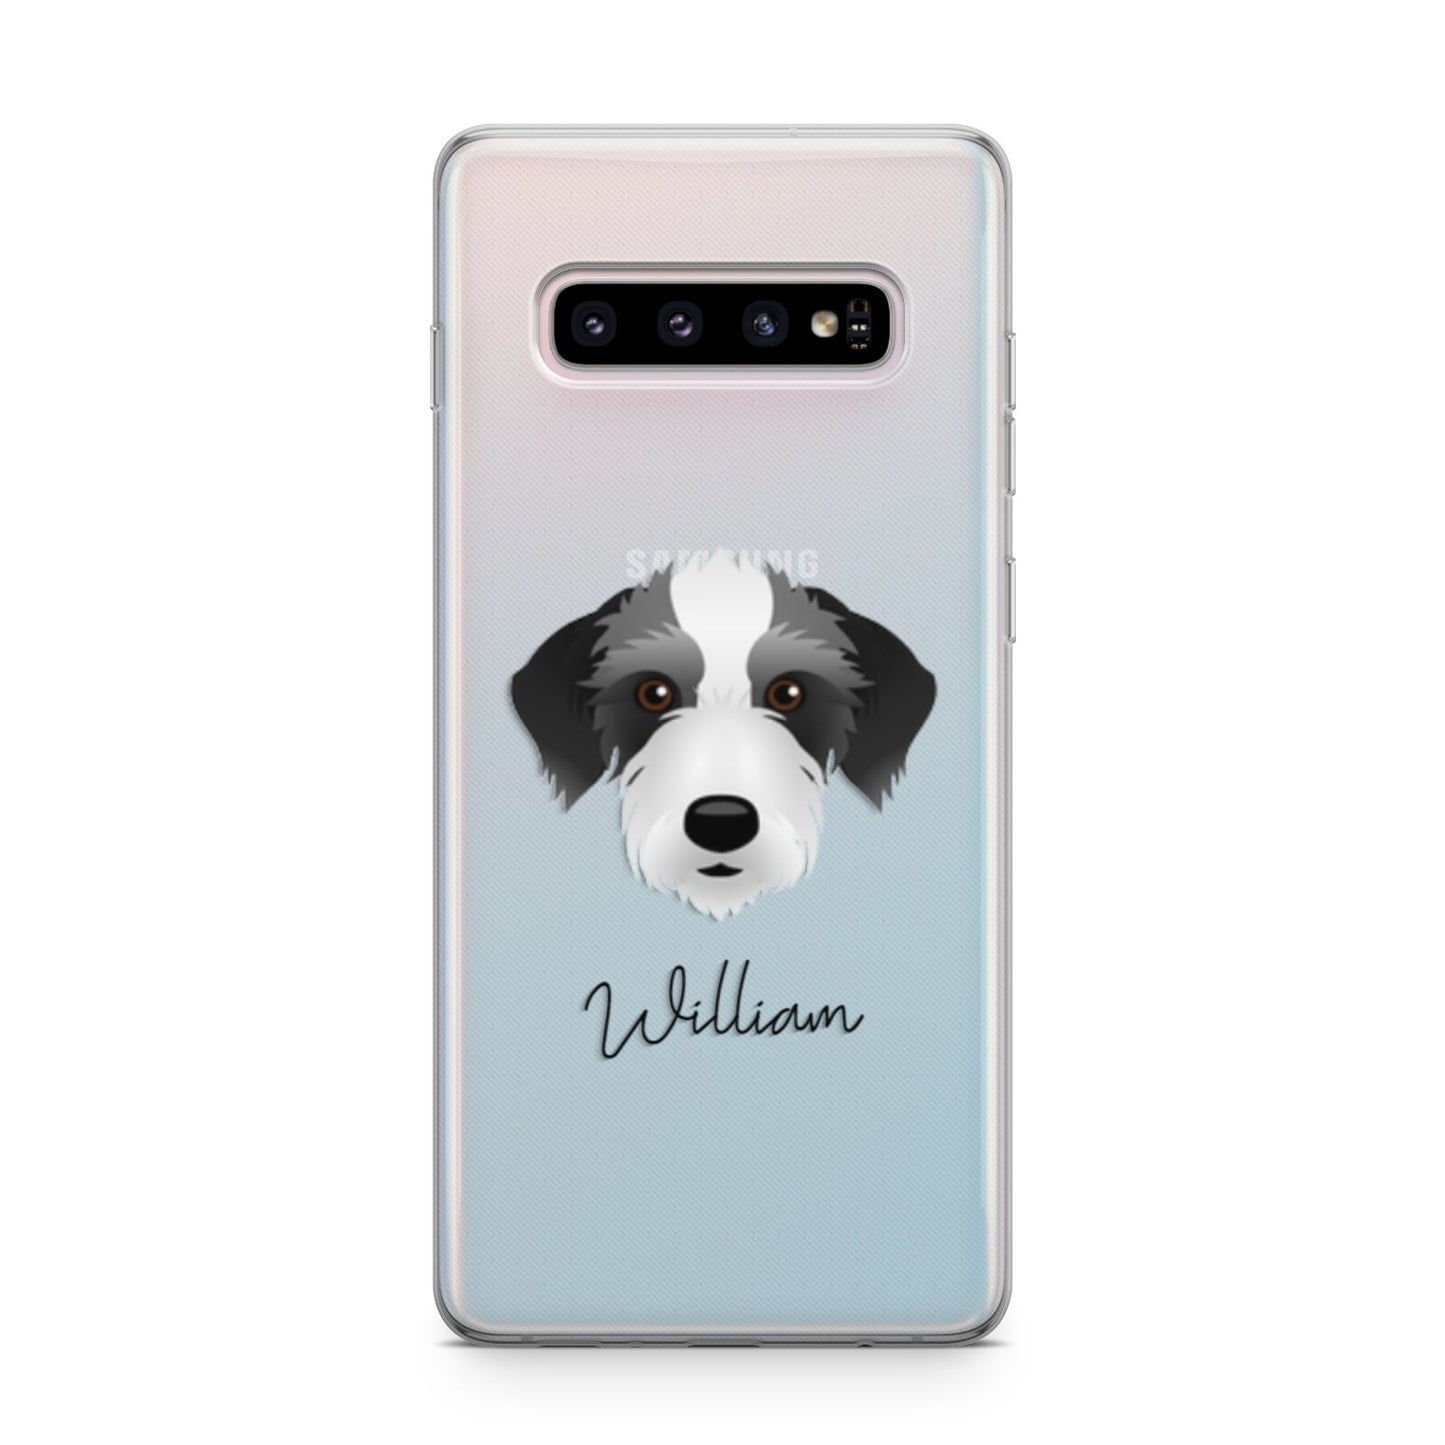 Bedlington Whippet Personalised Samsung Galaxy S10 Plus Case